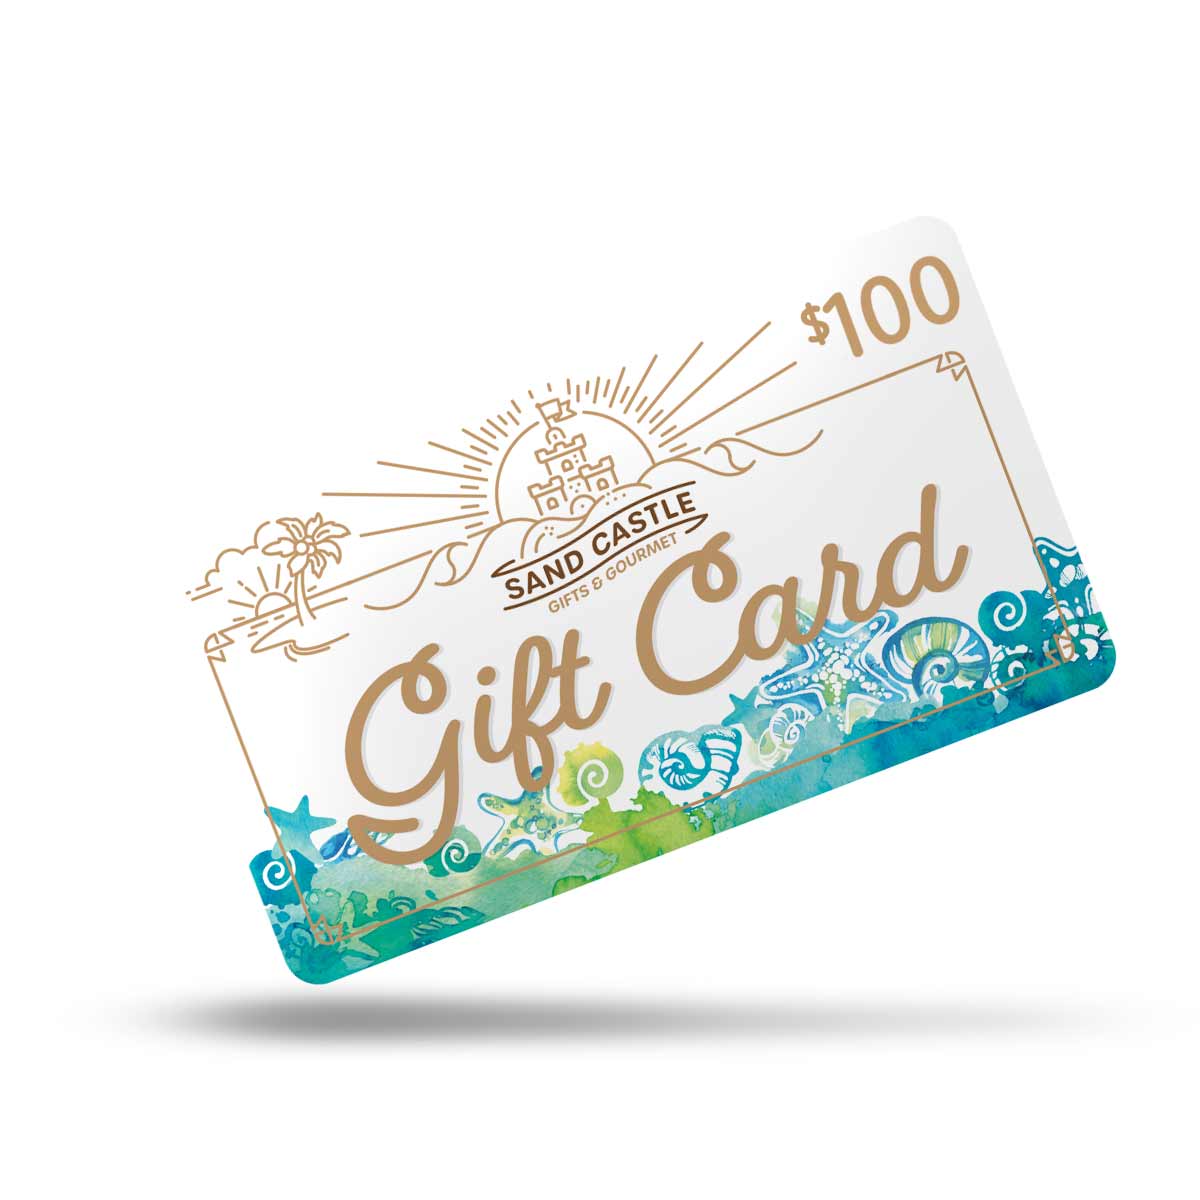 Sand Castle Gifts & Gourmet Gift Card